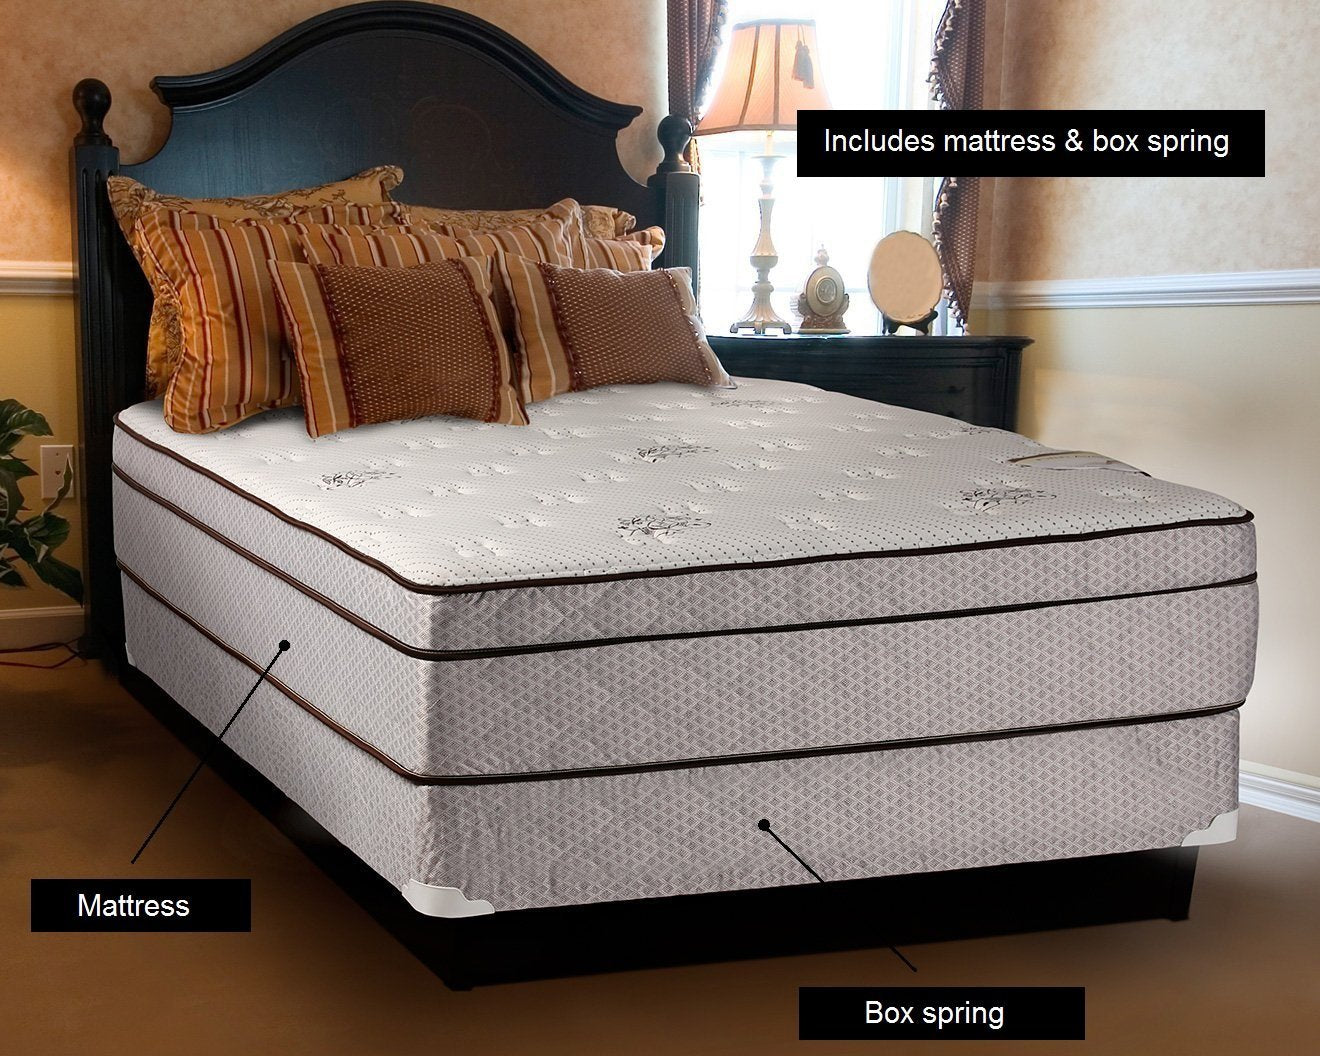 Fifth Ave Extra Soft Foam Eurotop (PillowTop) King Size Mattress & Box Spring Set - Therapeutic Technology, Orthopedic Support, Quality Sleep System